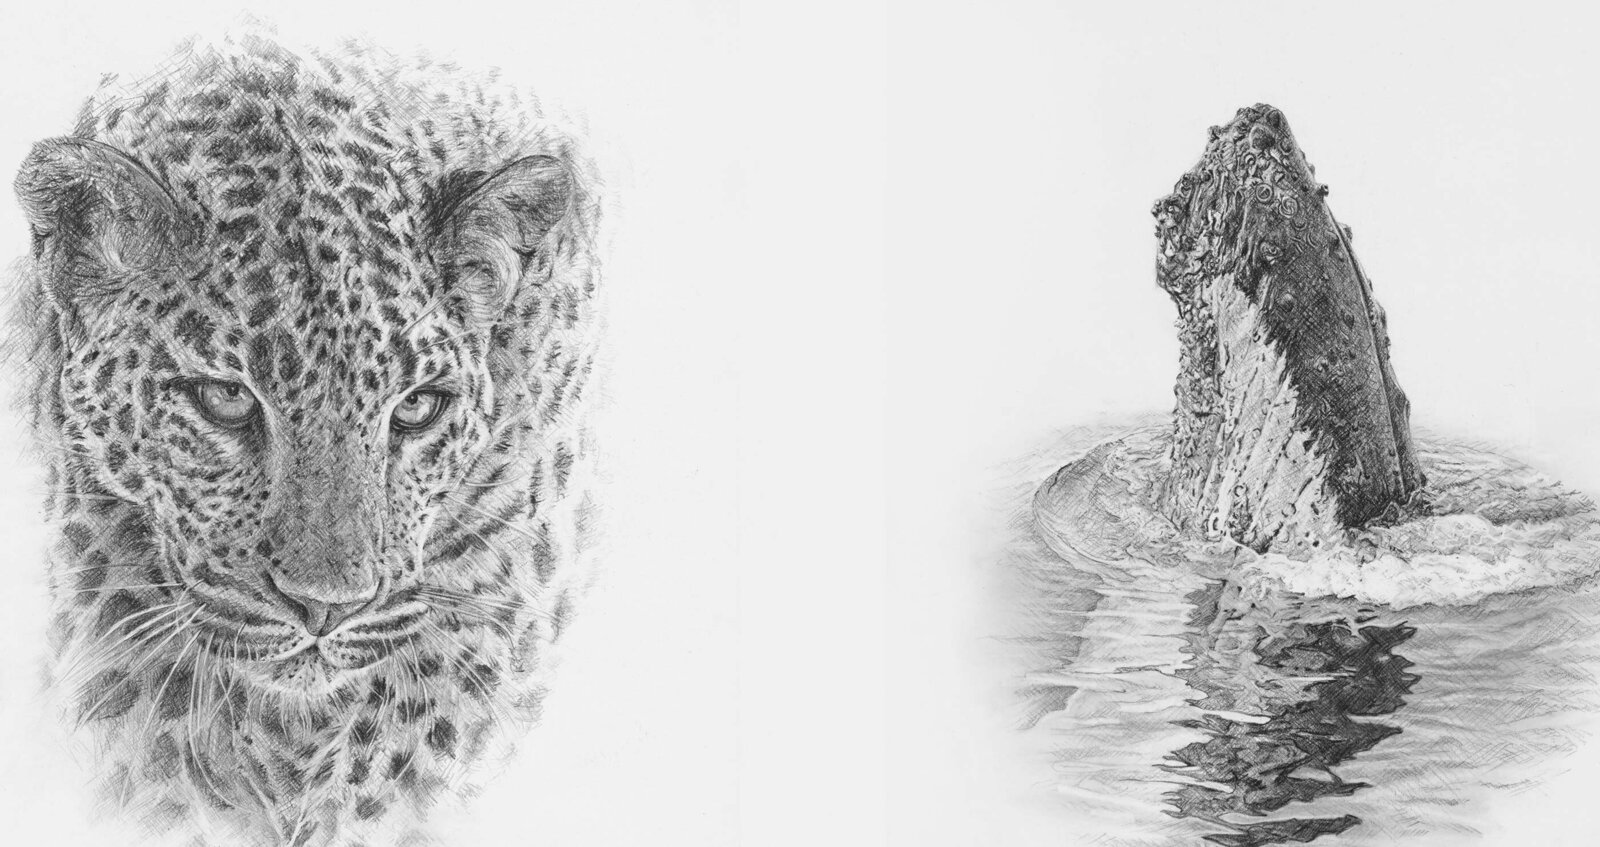 Townsend's leopard and whale graphite drawings